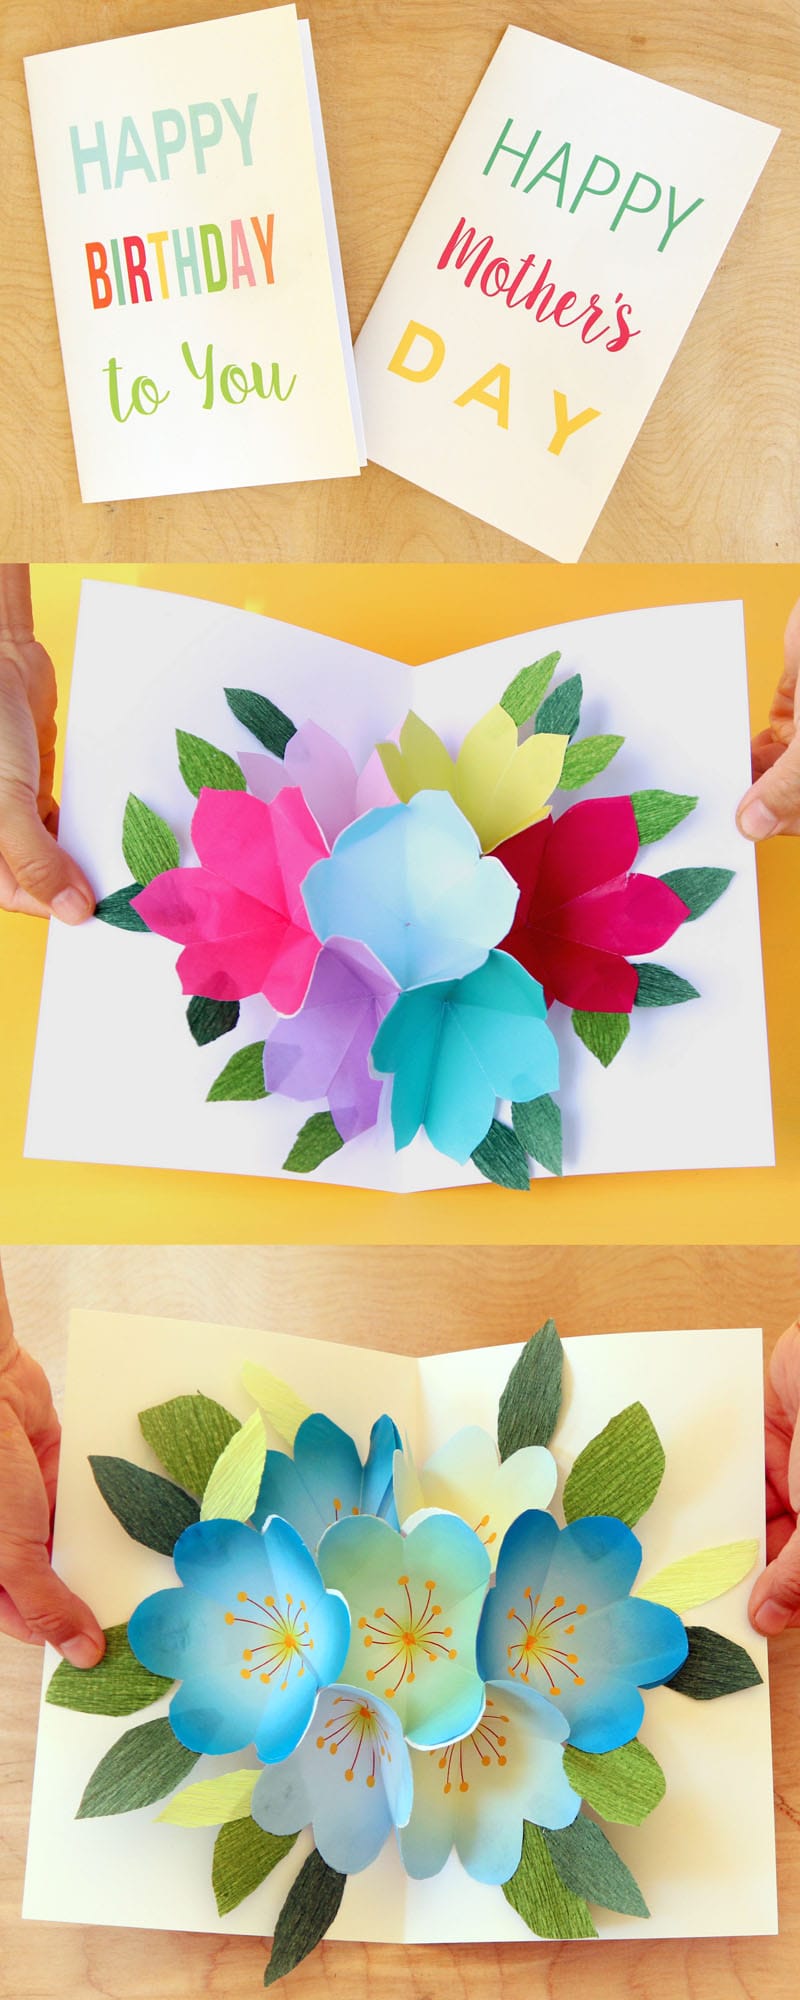 Free Printable Happy Birthday Card with Pop Up Bouquet - A Piece Within Happy Birthday Pop Up Card Free Template